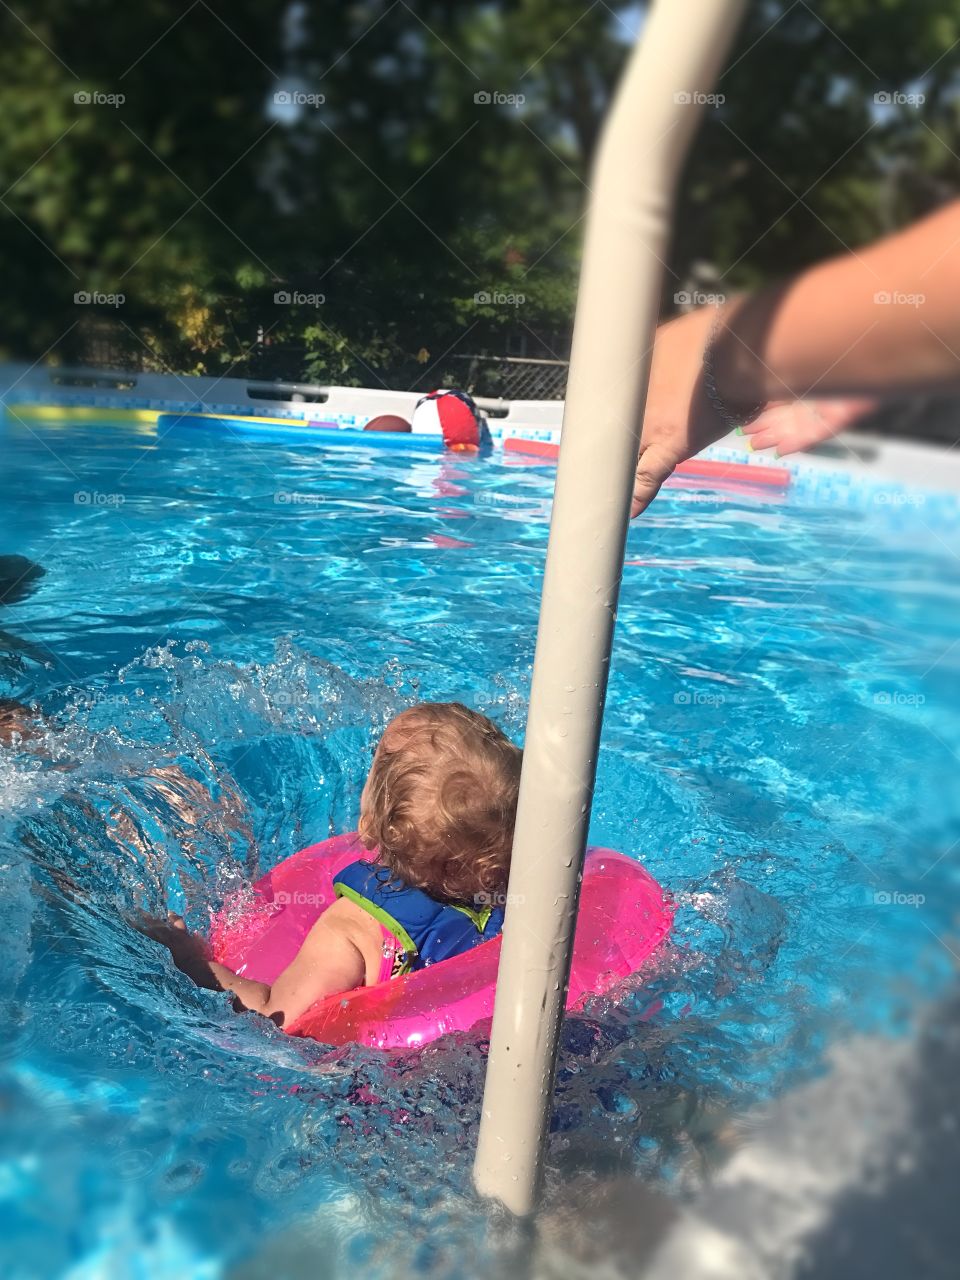 A fun day at the neighbors! This is my daughter being thrown into the pool